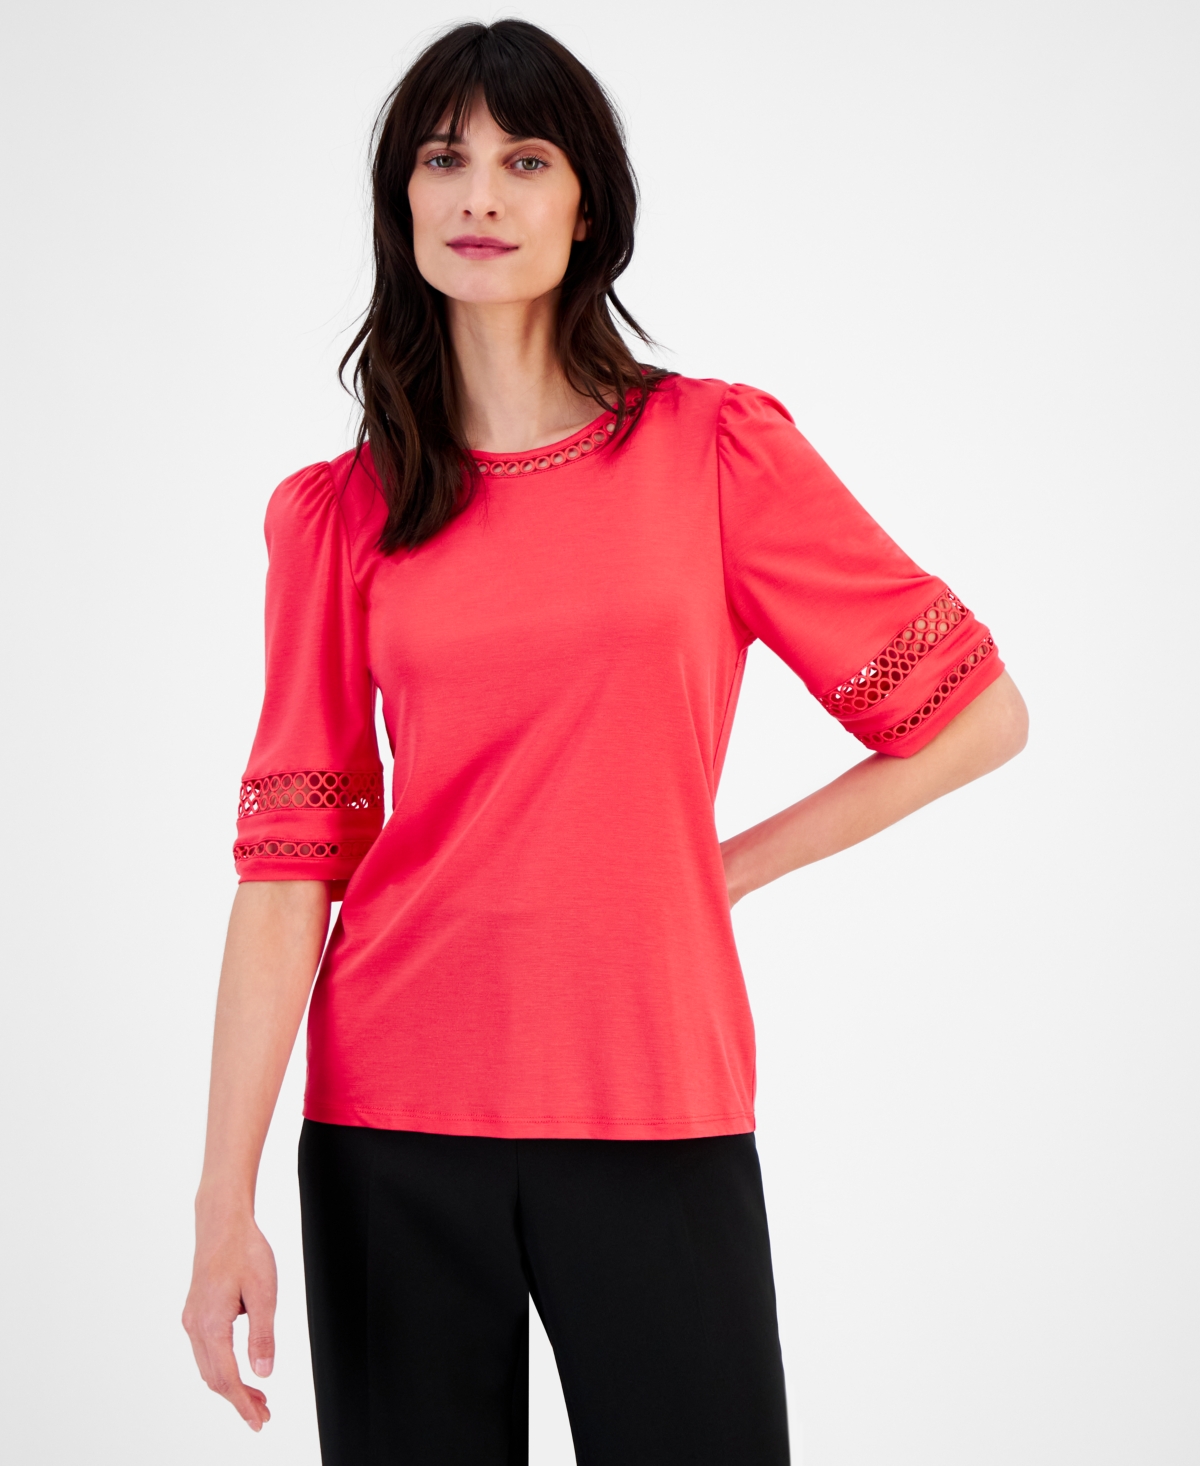 Women's Harmony Knit Open-Trim Elbow-Sleeve Top, Created for Macy's - Red Pear